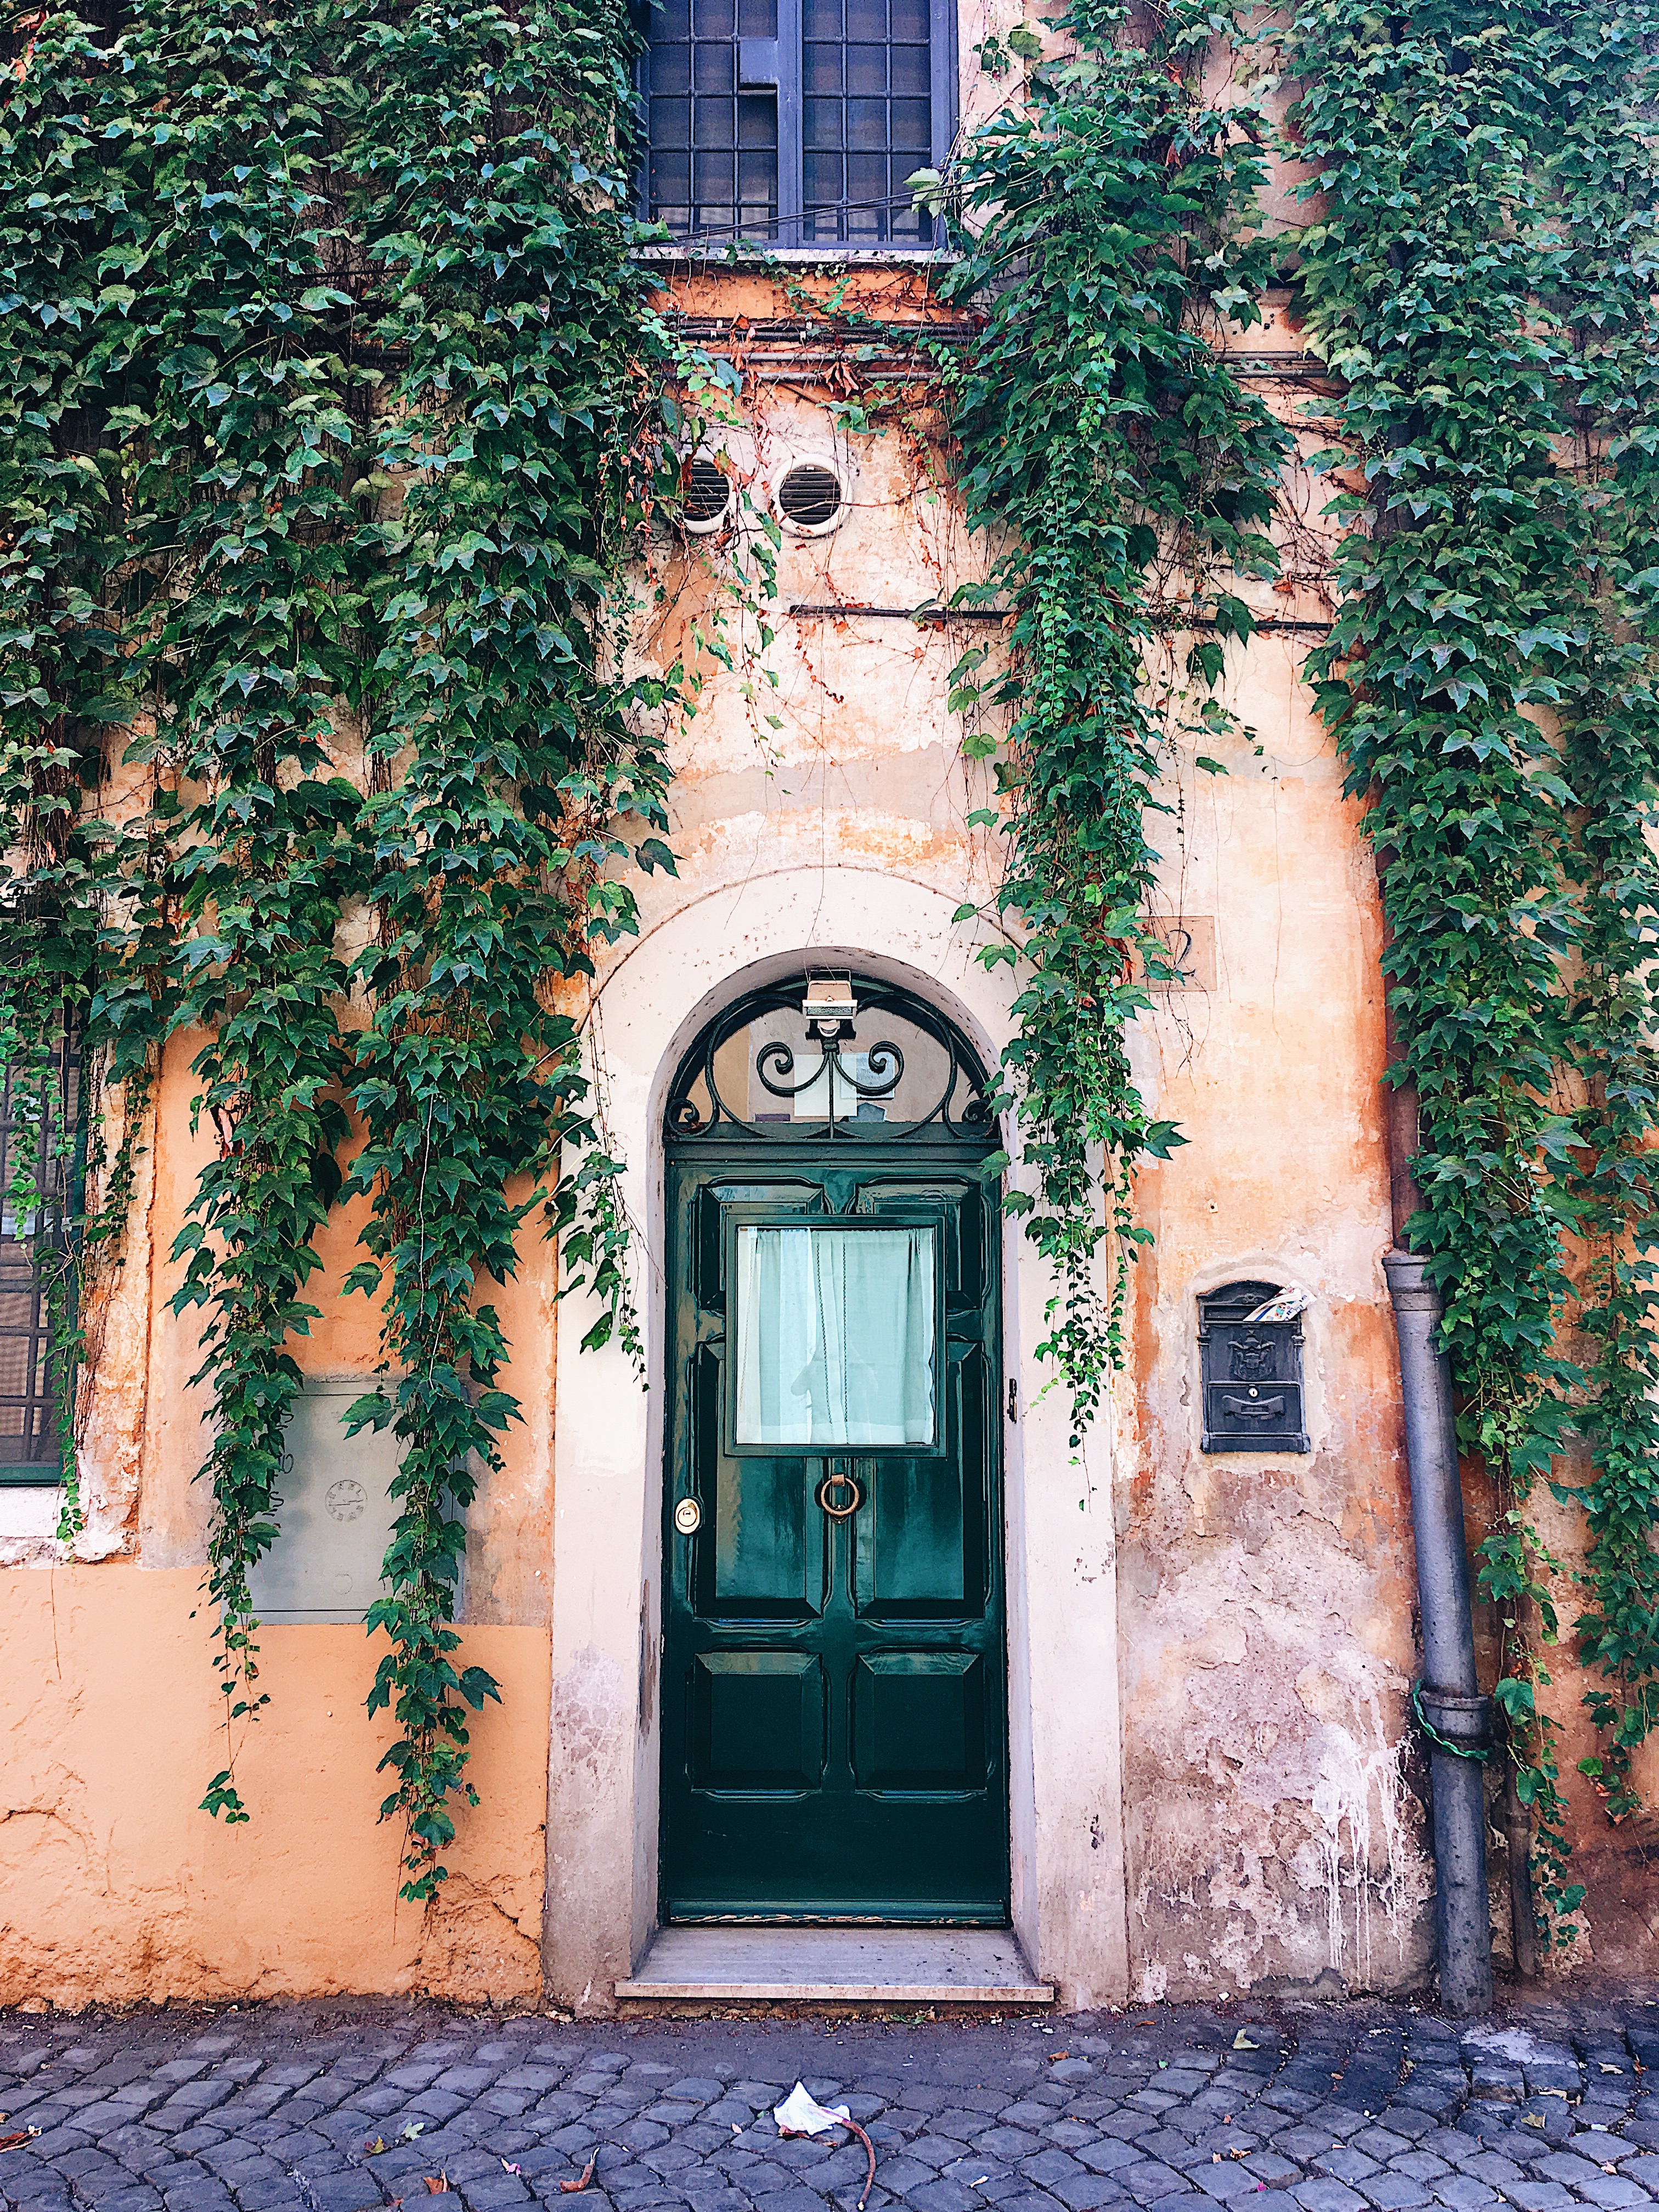 Draping Vines in Rome